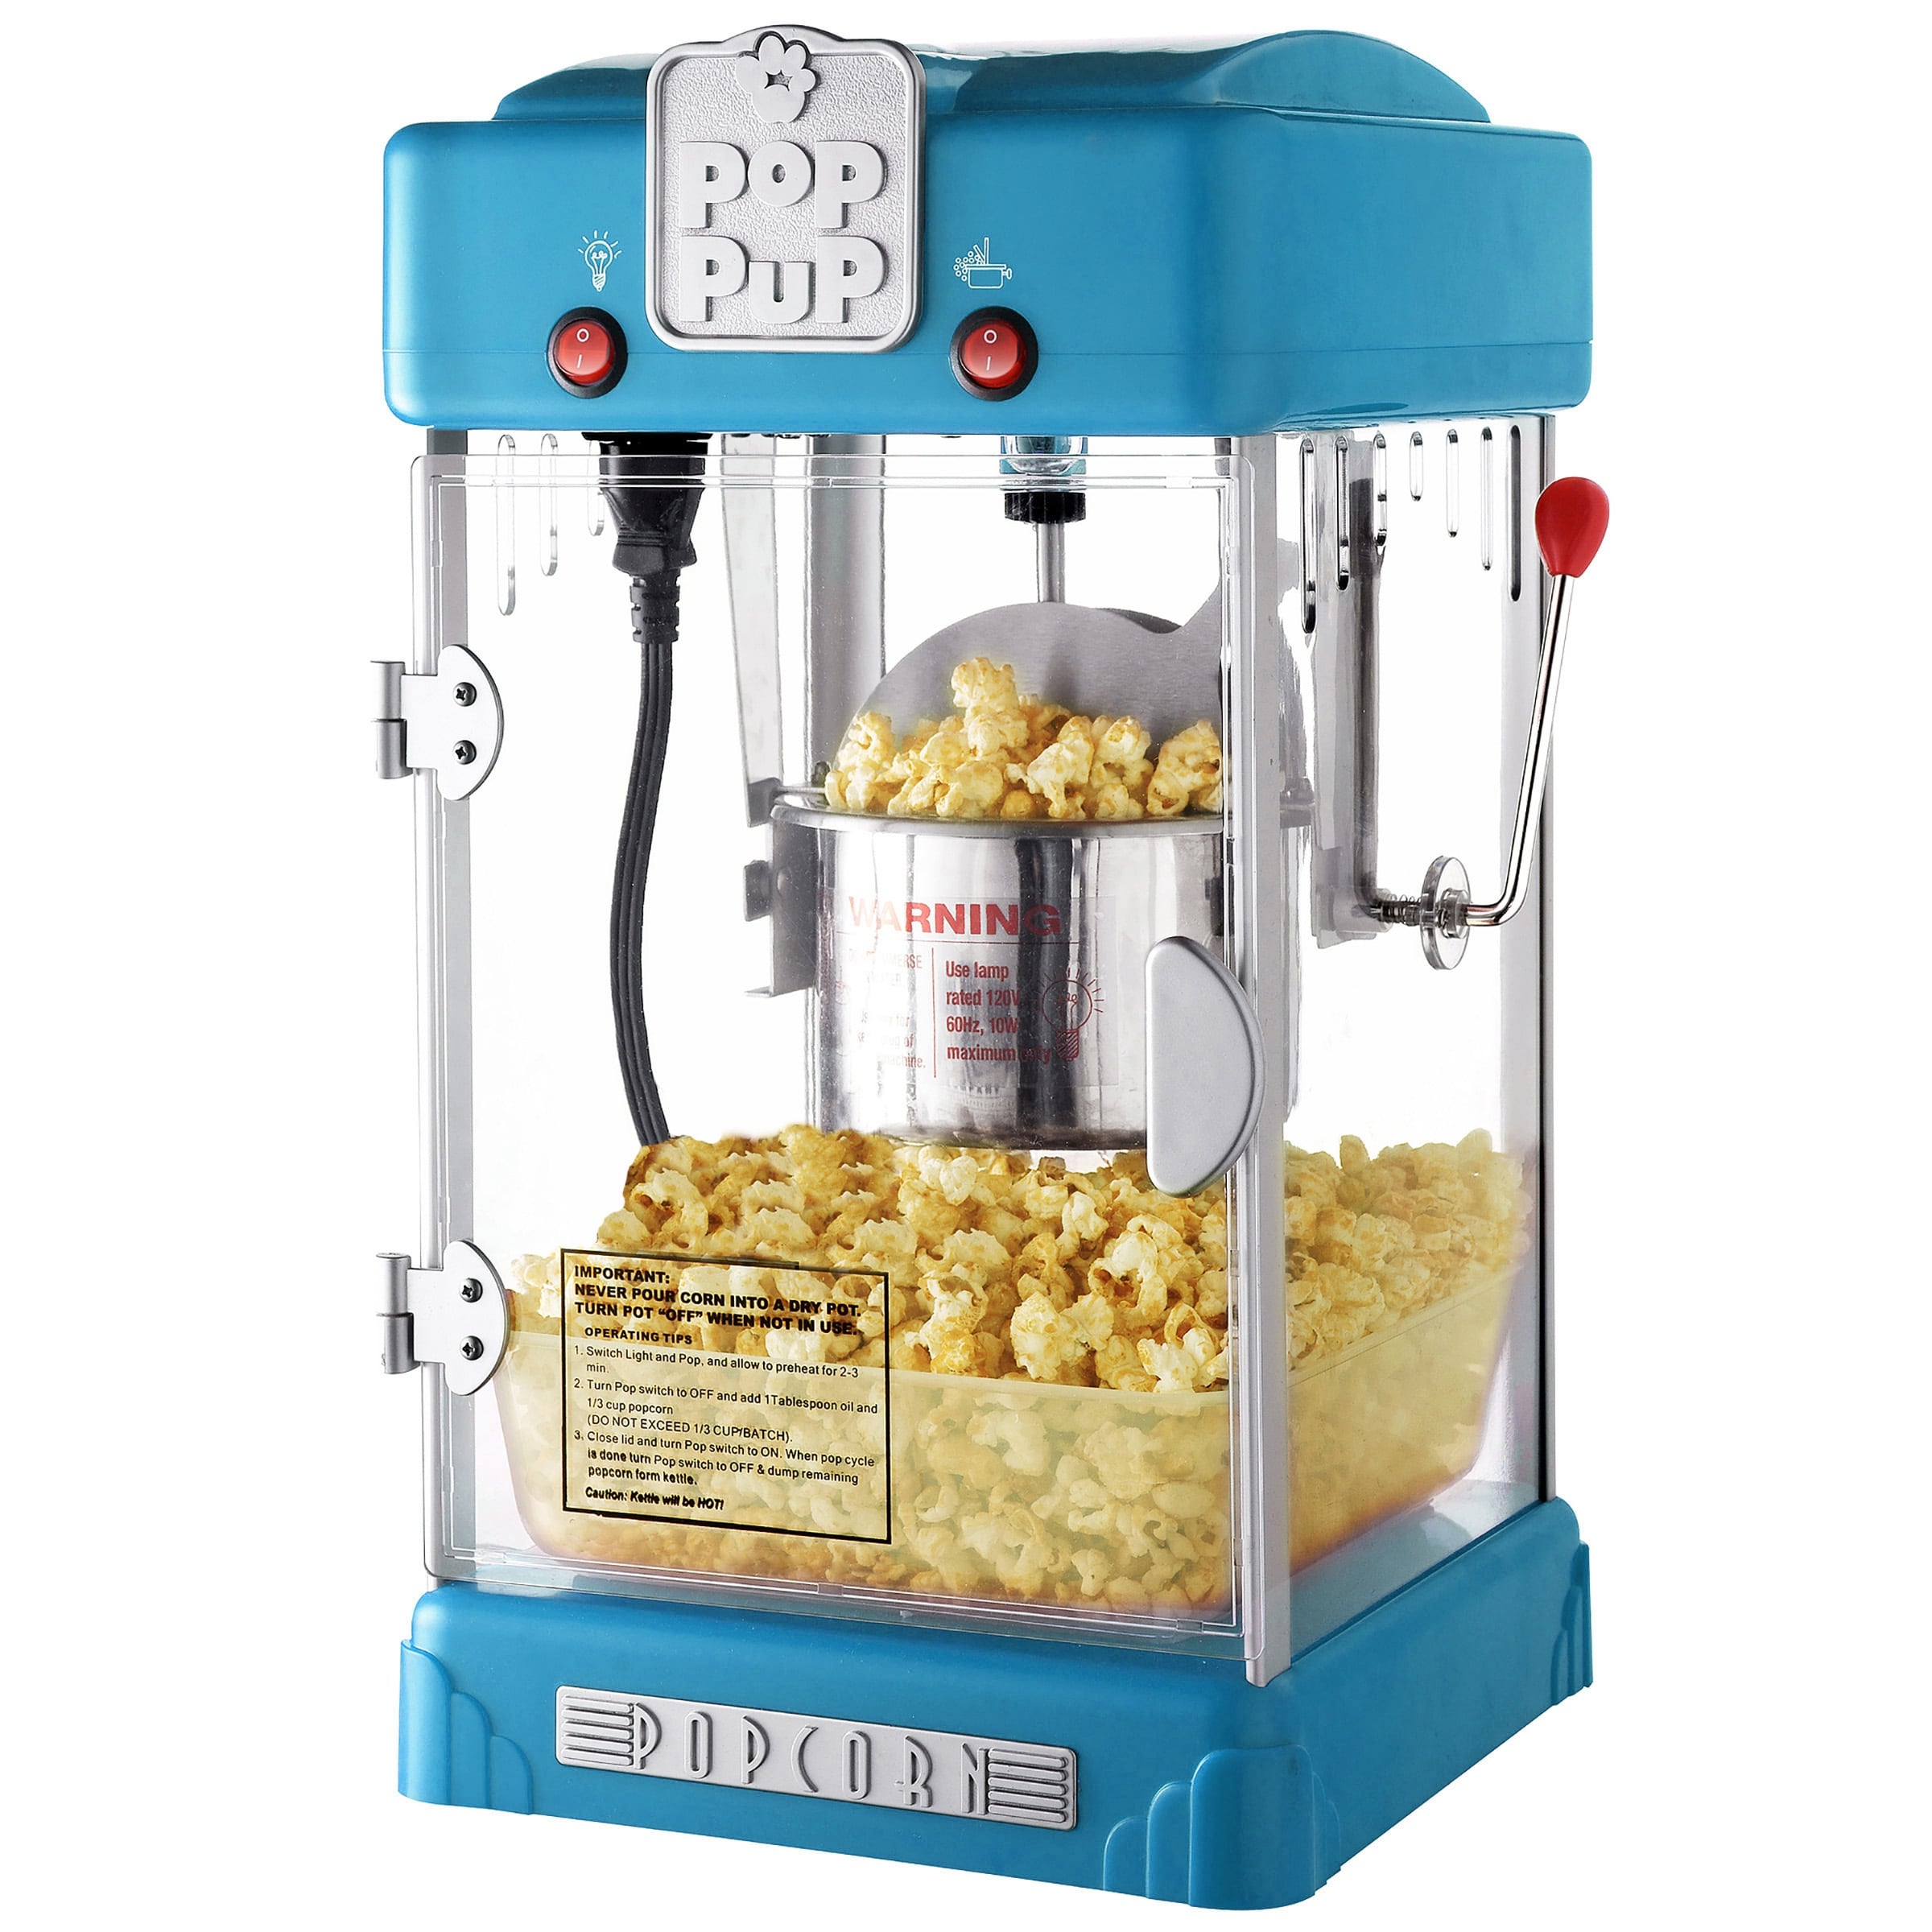 https://ak1.ostkcdn.com/images/products/is/images/direct/224f613734490f445acab7d2a53fa09596d19fdd/Pop-Pup-Countertop-Popcorn-Machine-%E2%80%93-2.5oz-Kettle-with-Measuring-Spoon%2C-Scoop%2C-and-25-Serving-Bags-%28Blue%29.jpg